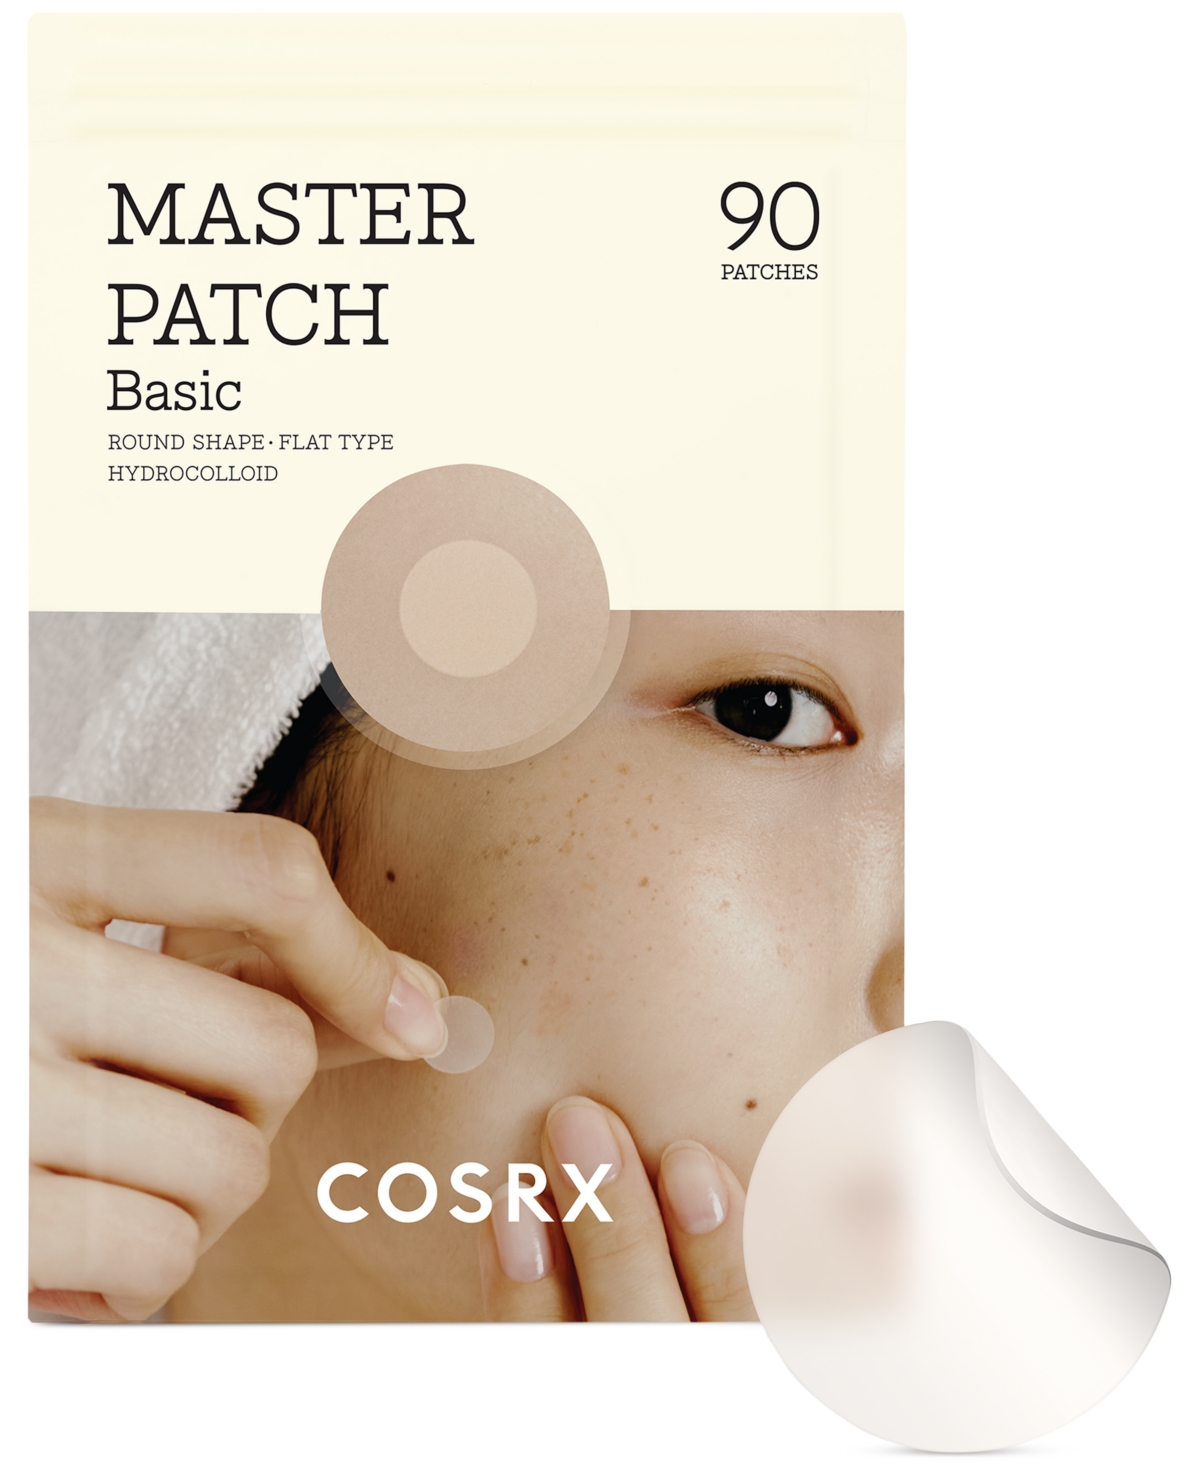 Master Patch Basic, 90 patches